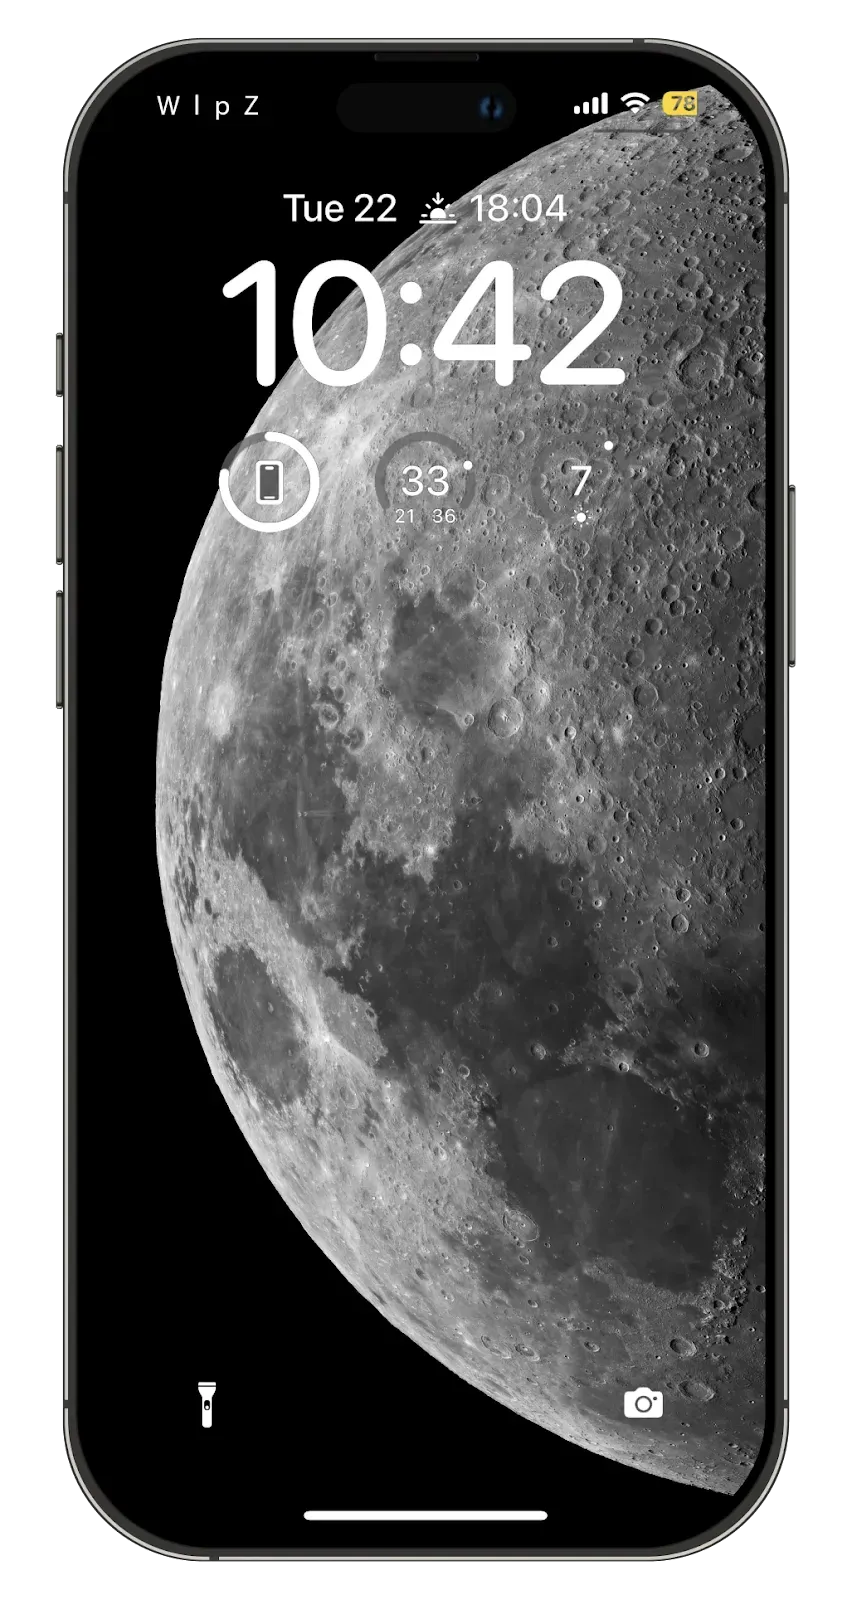 giant moon photo wallpaper for phone